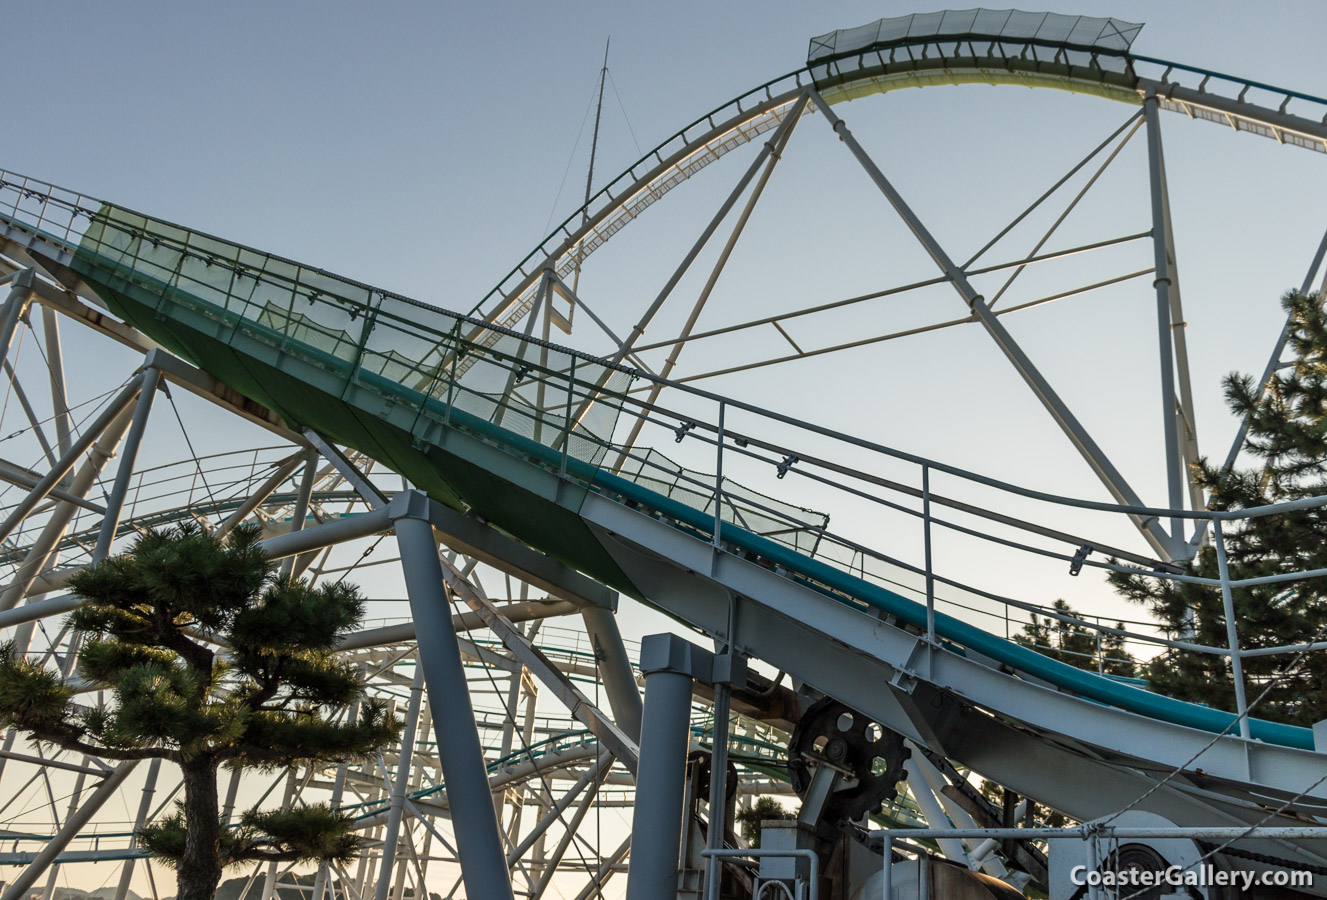 Surf Coaster Leviathan was built by TOGO International